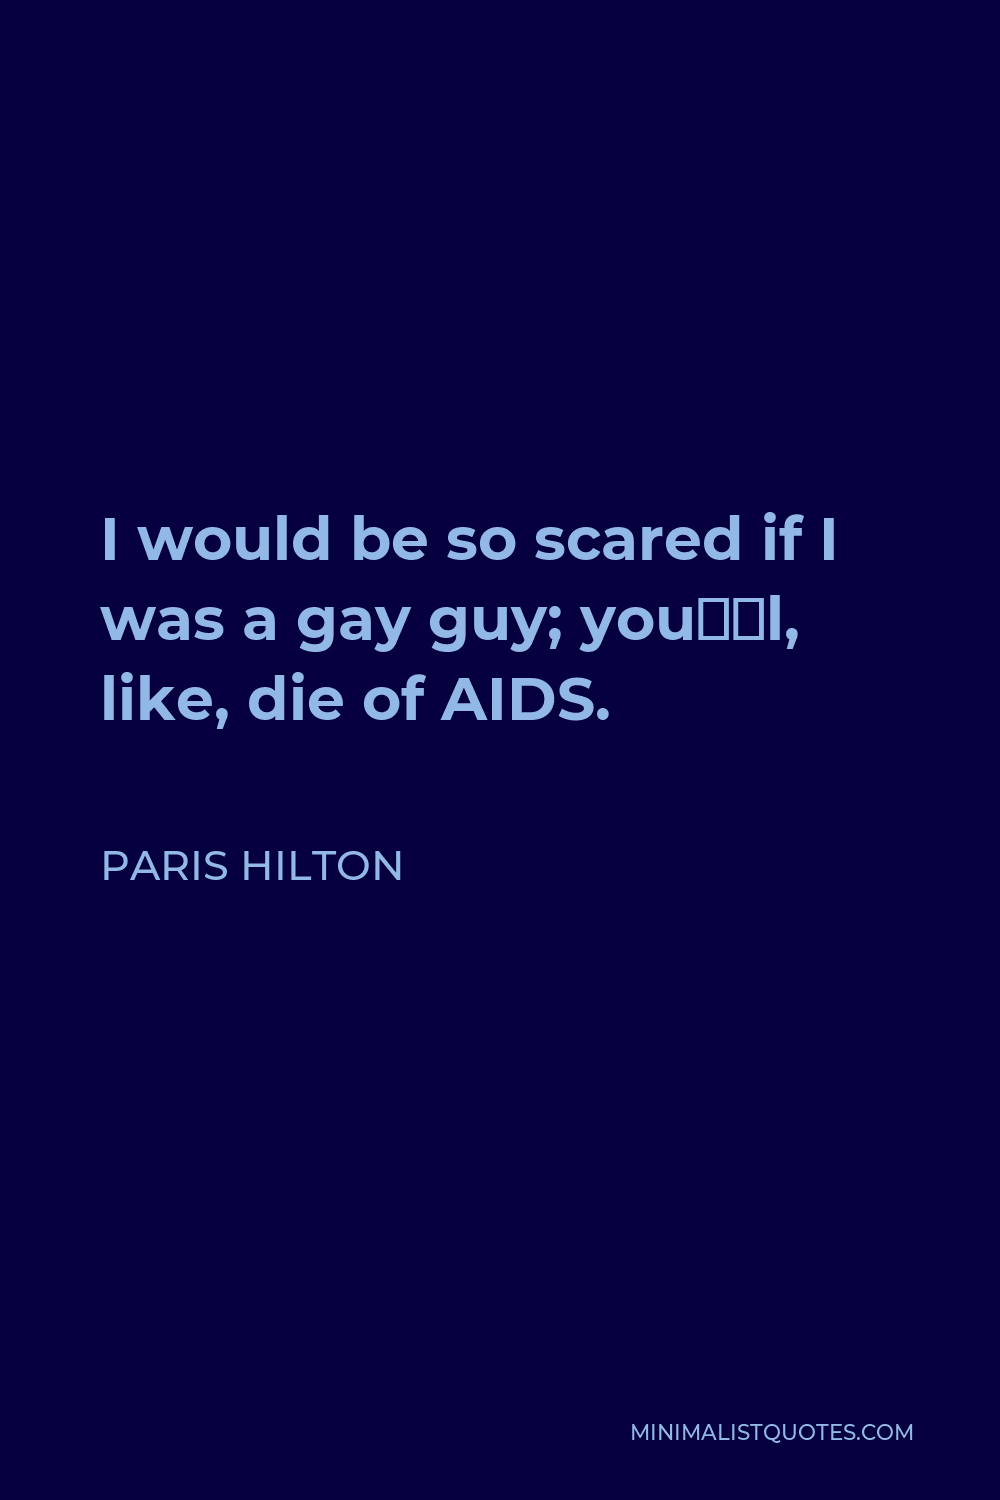 Paris Hilton Quote - I would be so scared if I was a gay guy; you’ll, like, die of AIDS.